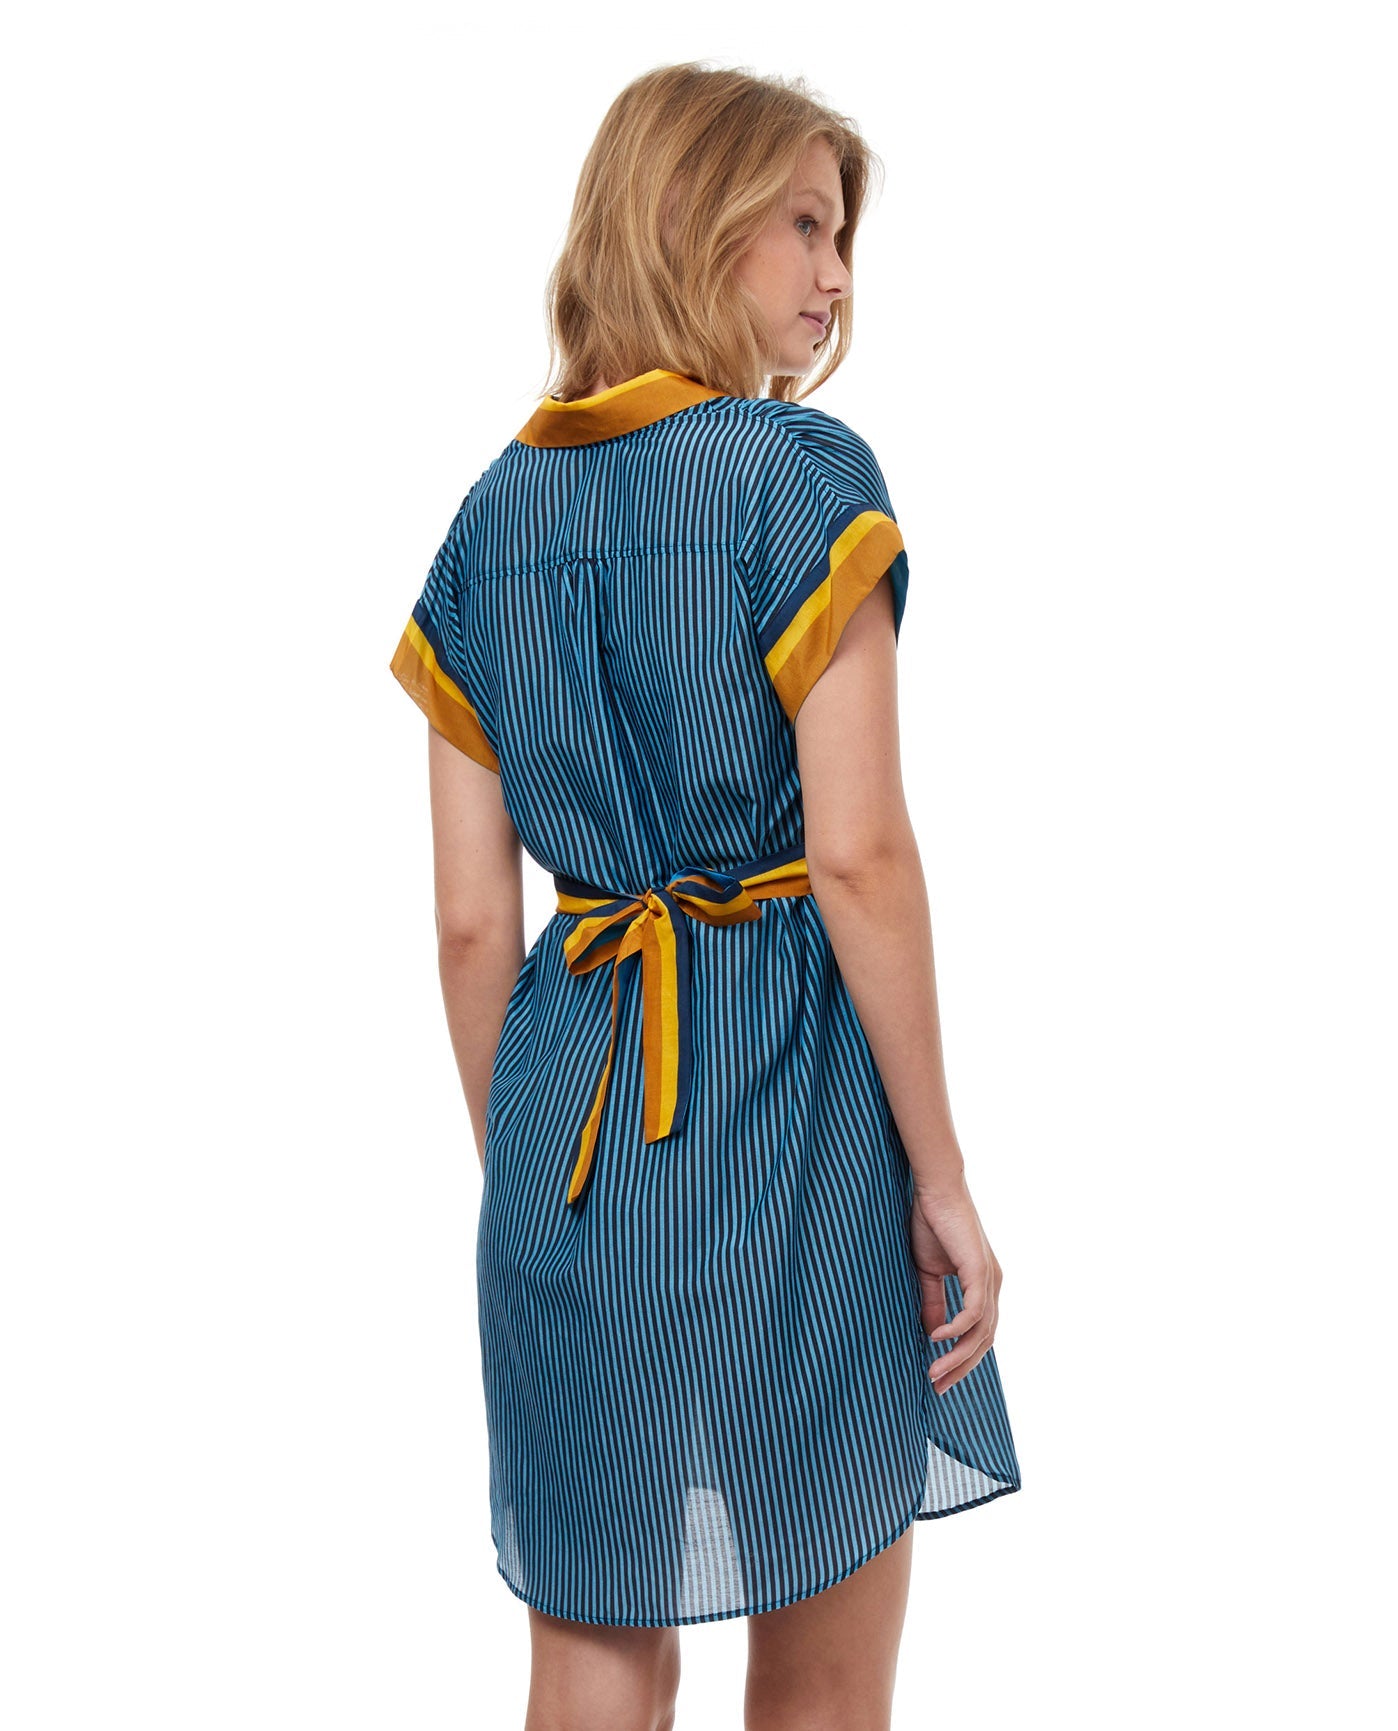 Back View Of Luma Stripes Of Light Cover Up Shirt Dress With Tie | LUMA STRIPES OF LIGHT BLUE